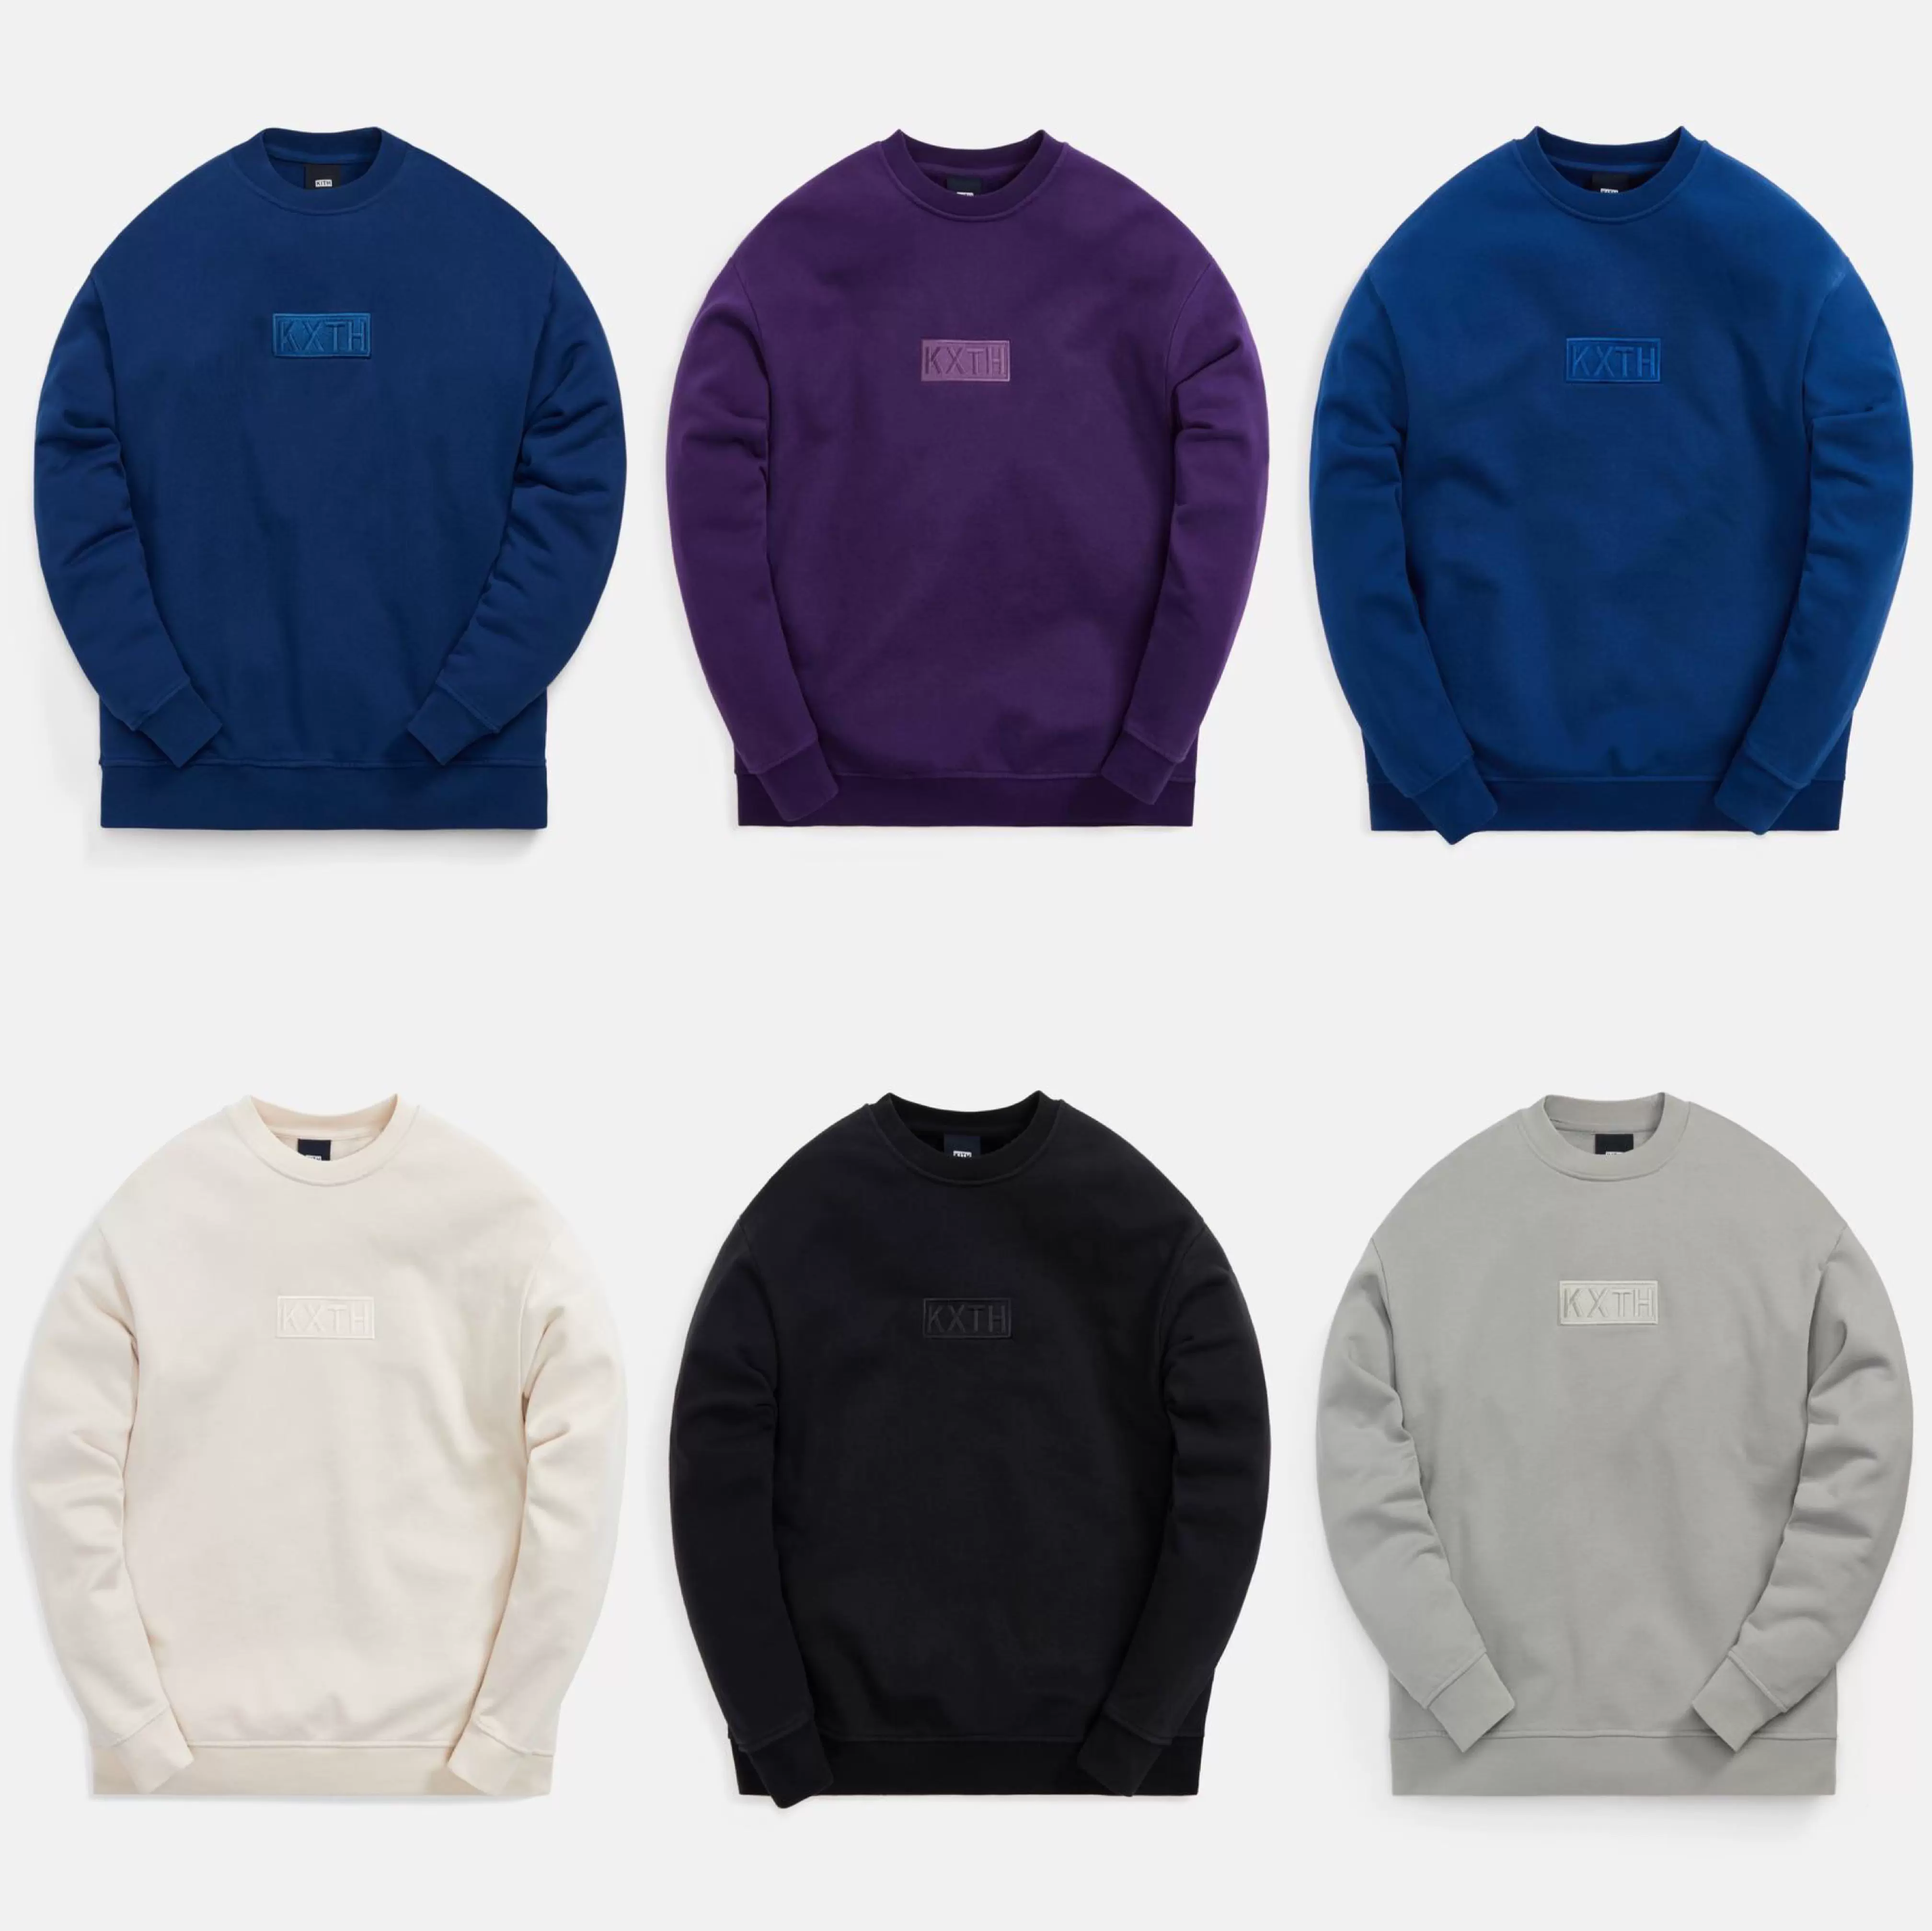 Kith Cyber Monday Hoodie KXTH 10周年 - パーカー